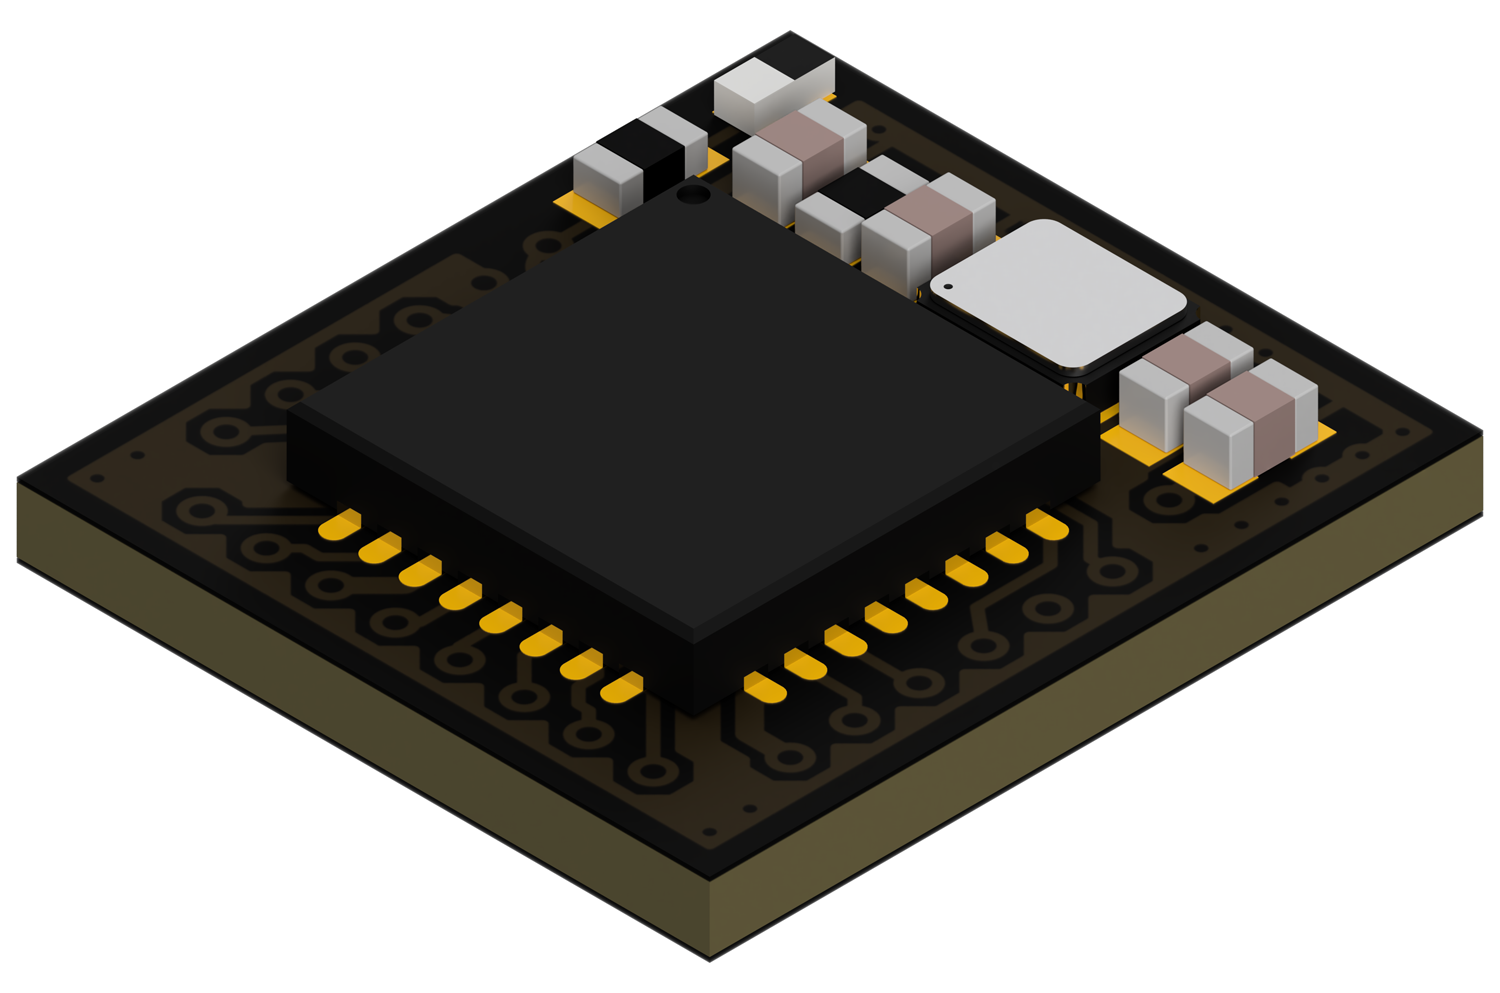 Cybercore X1 A Powerful yet Efficient Wi-Fi Module in Tiny Form Factor